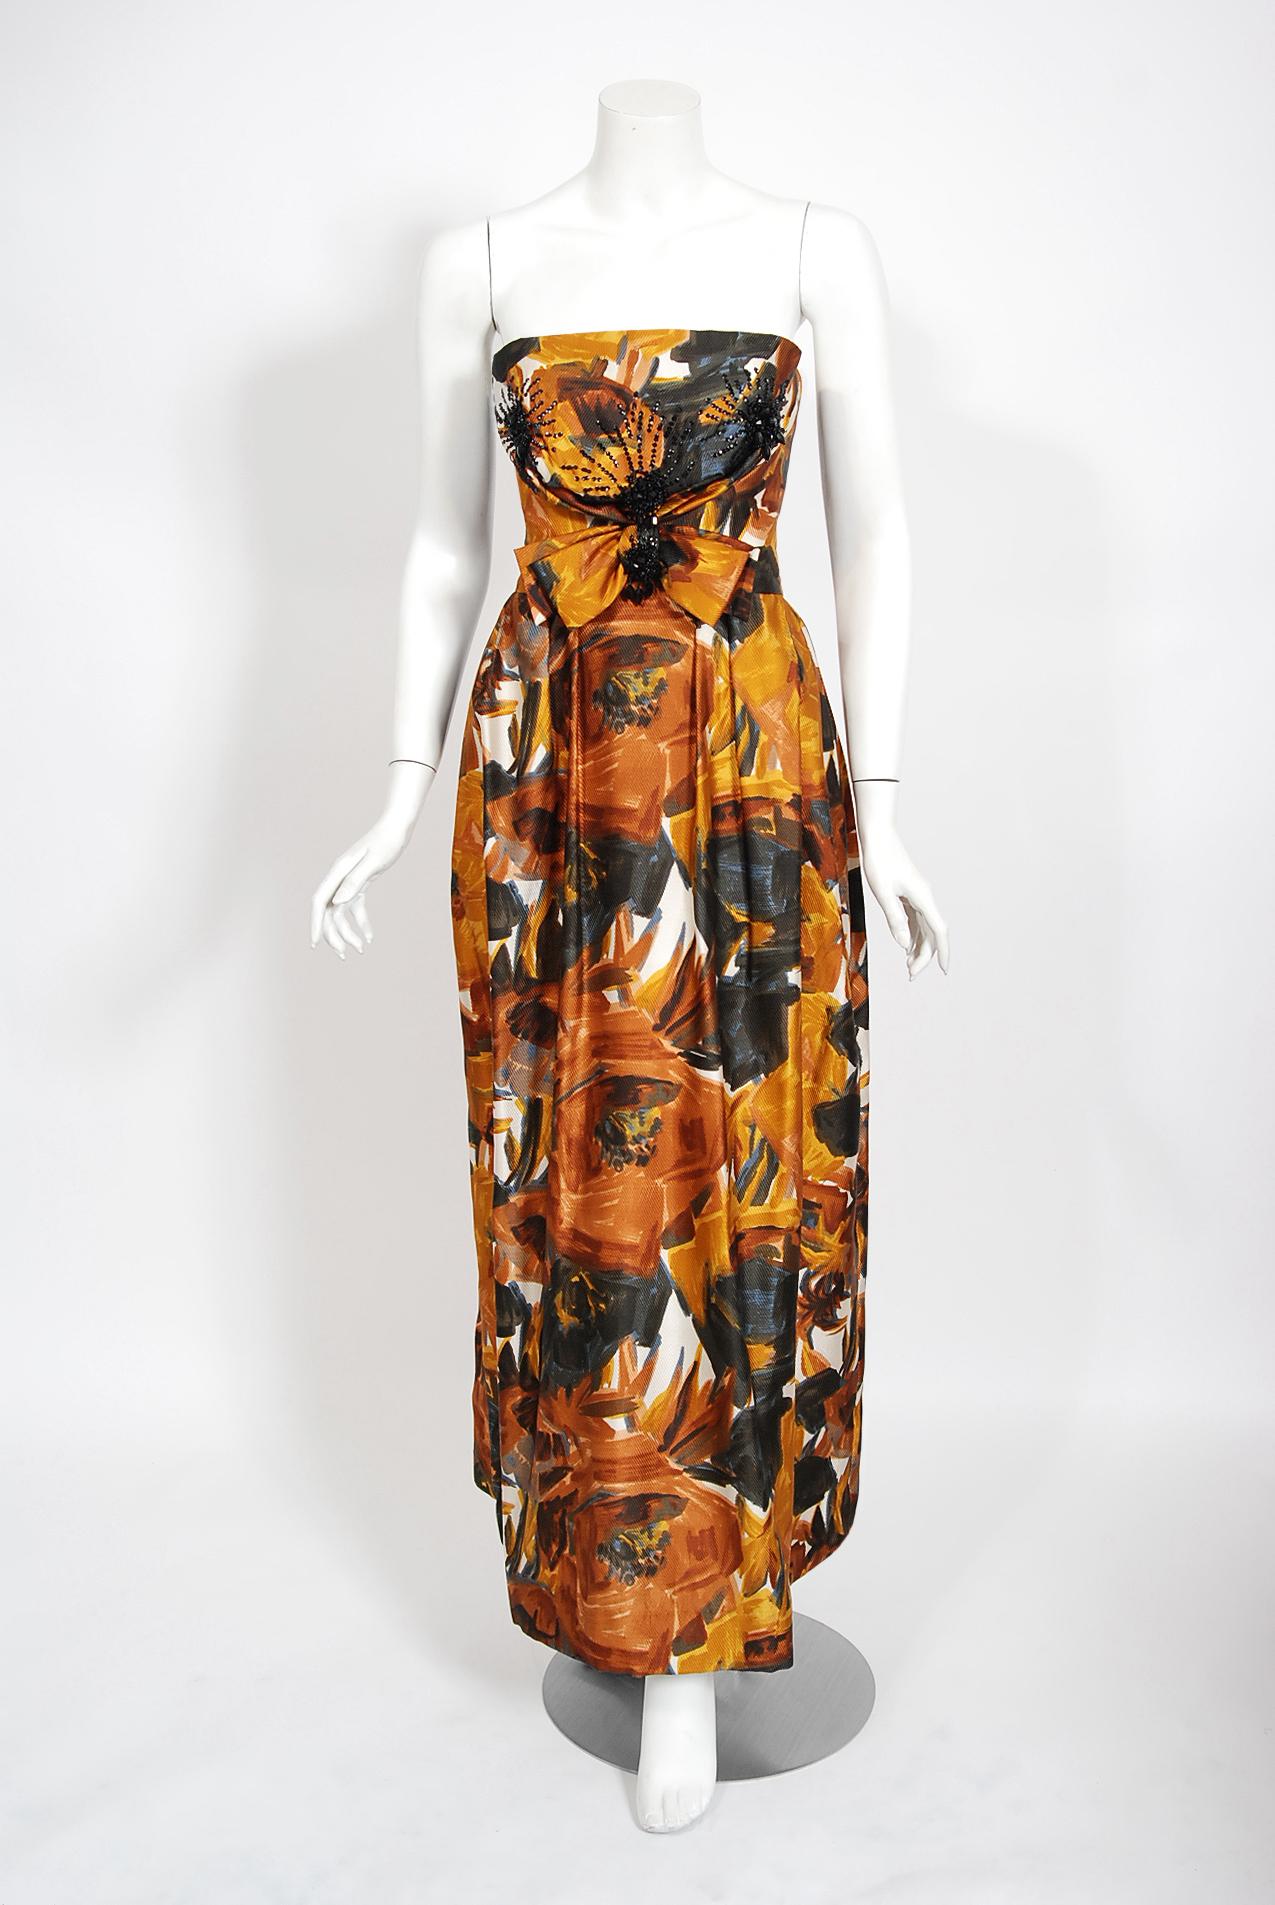 Gorgeous Helena Barbieri marigold roses floral print gown dating back to the early 1960's. Creations by Helena Barbieri are sought after by savvy collectors who appreciate high-quality construction and attention to detail. Barbieri's work is often